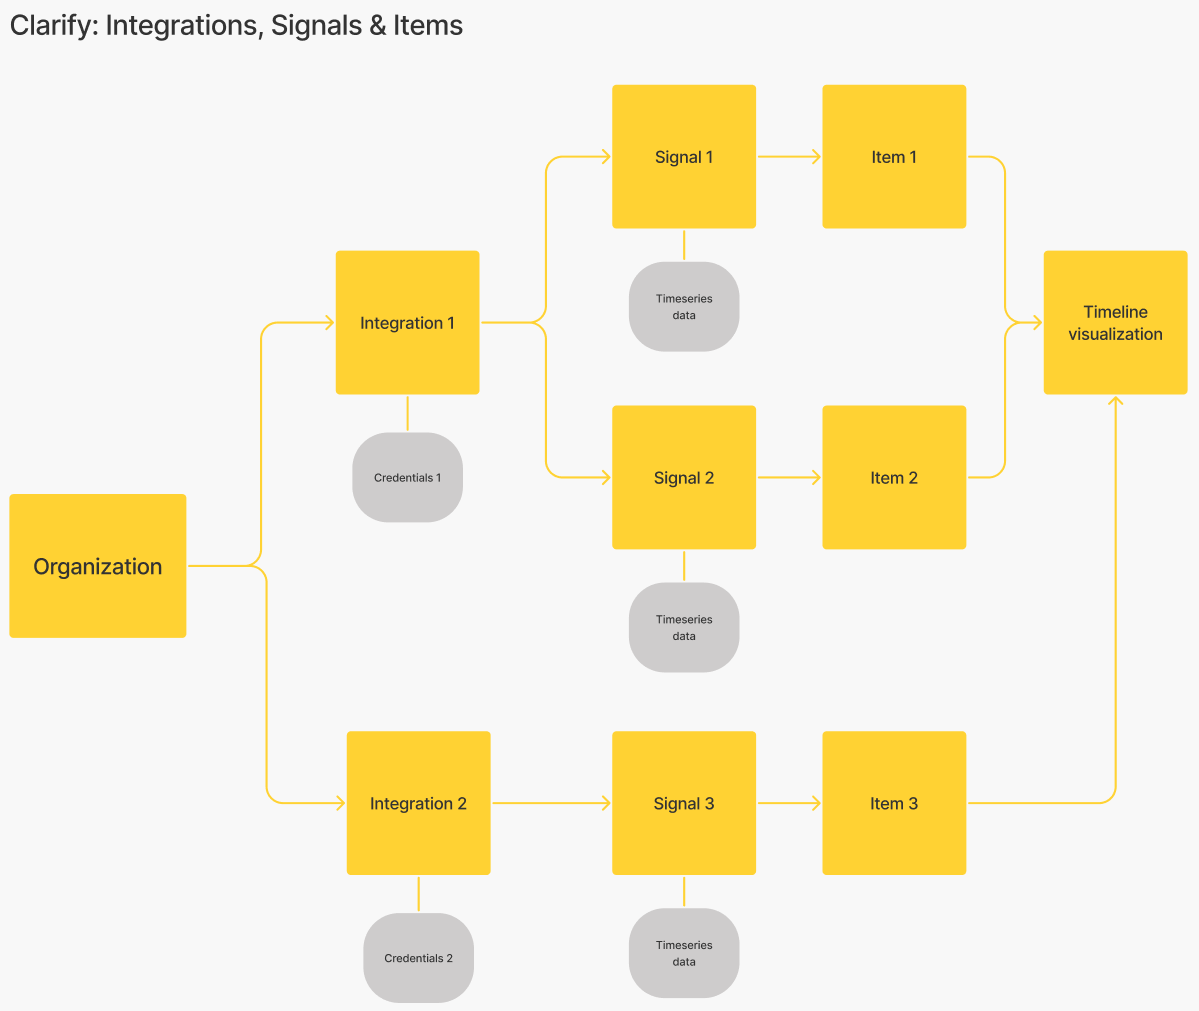 Overview of integrations, signals & items.